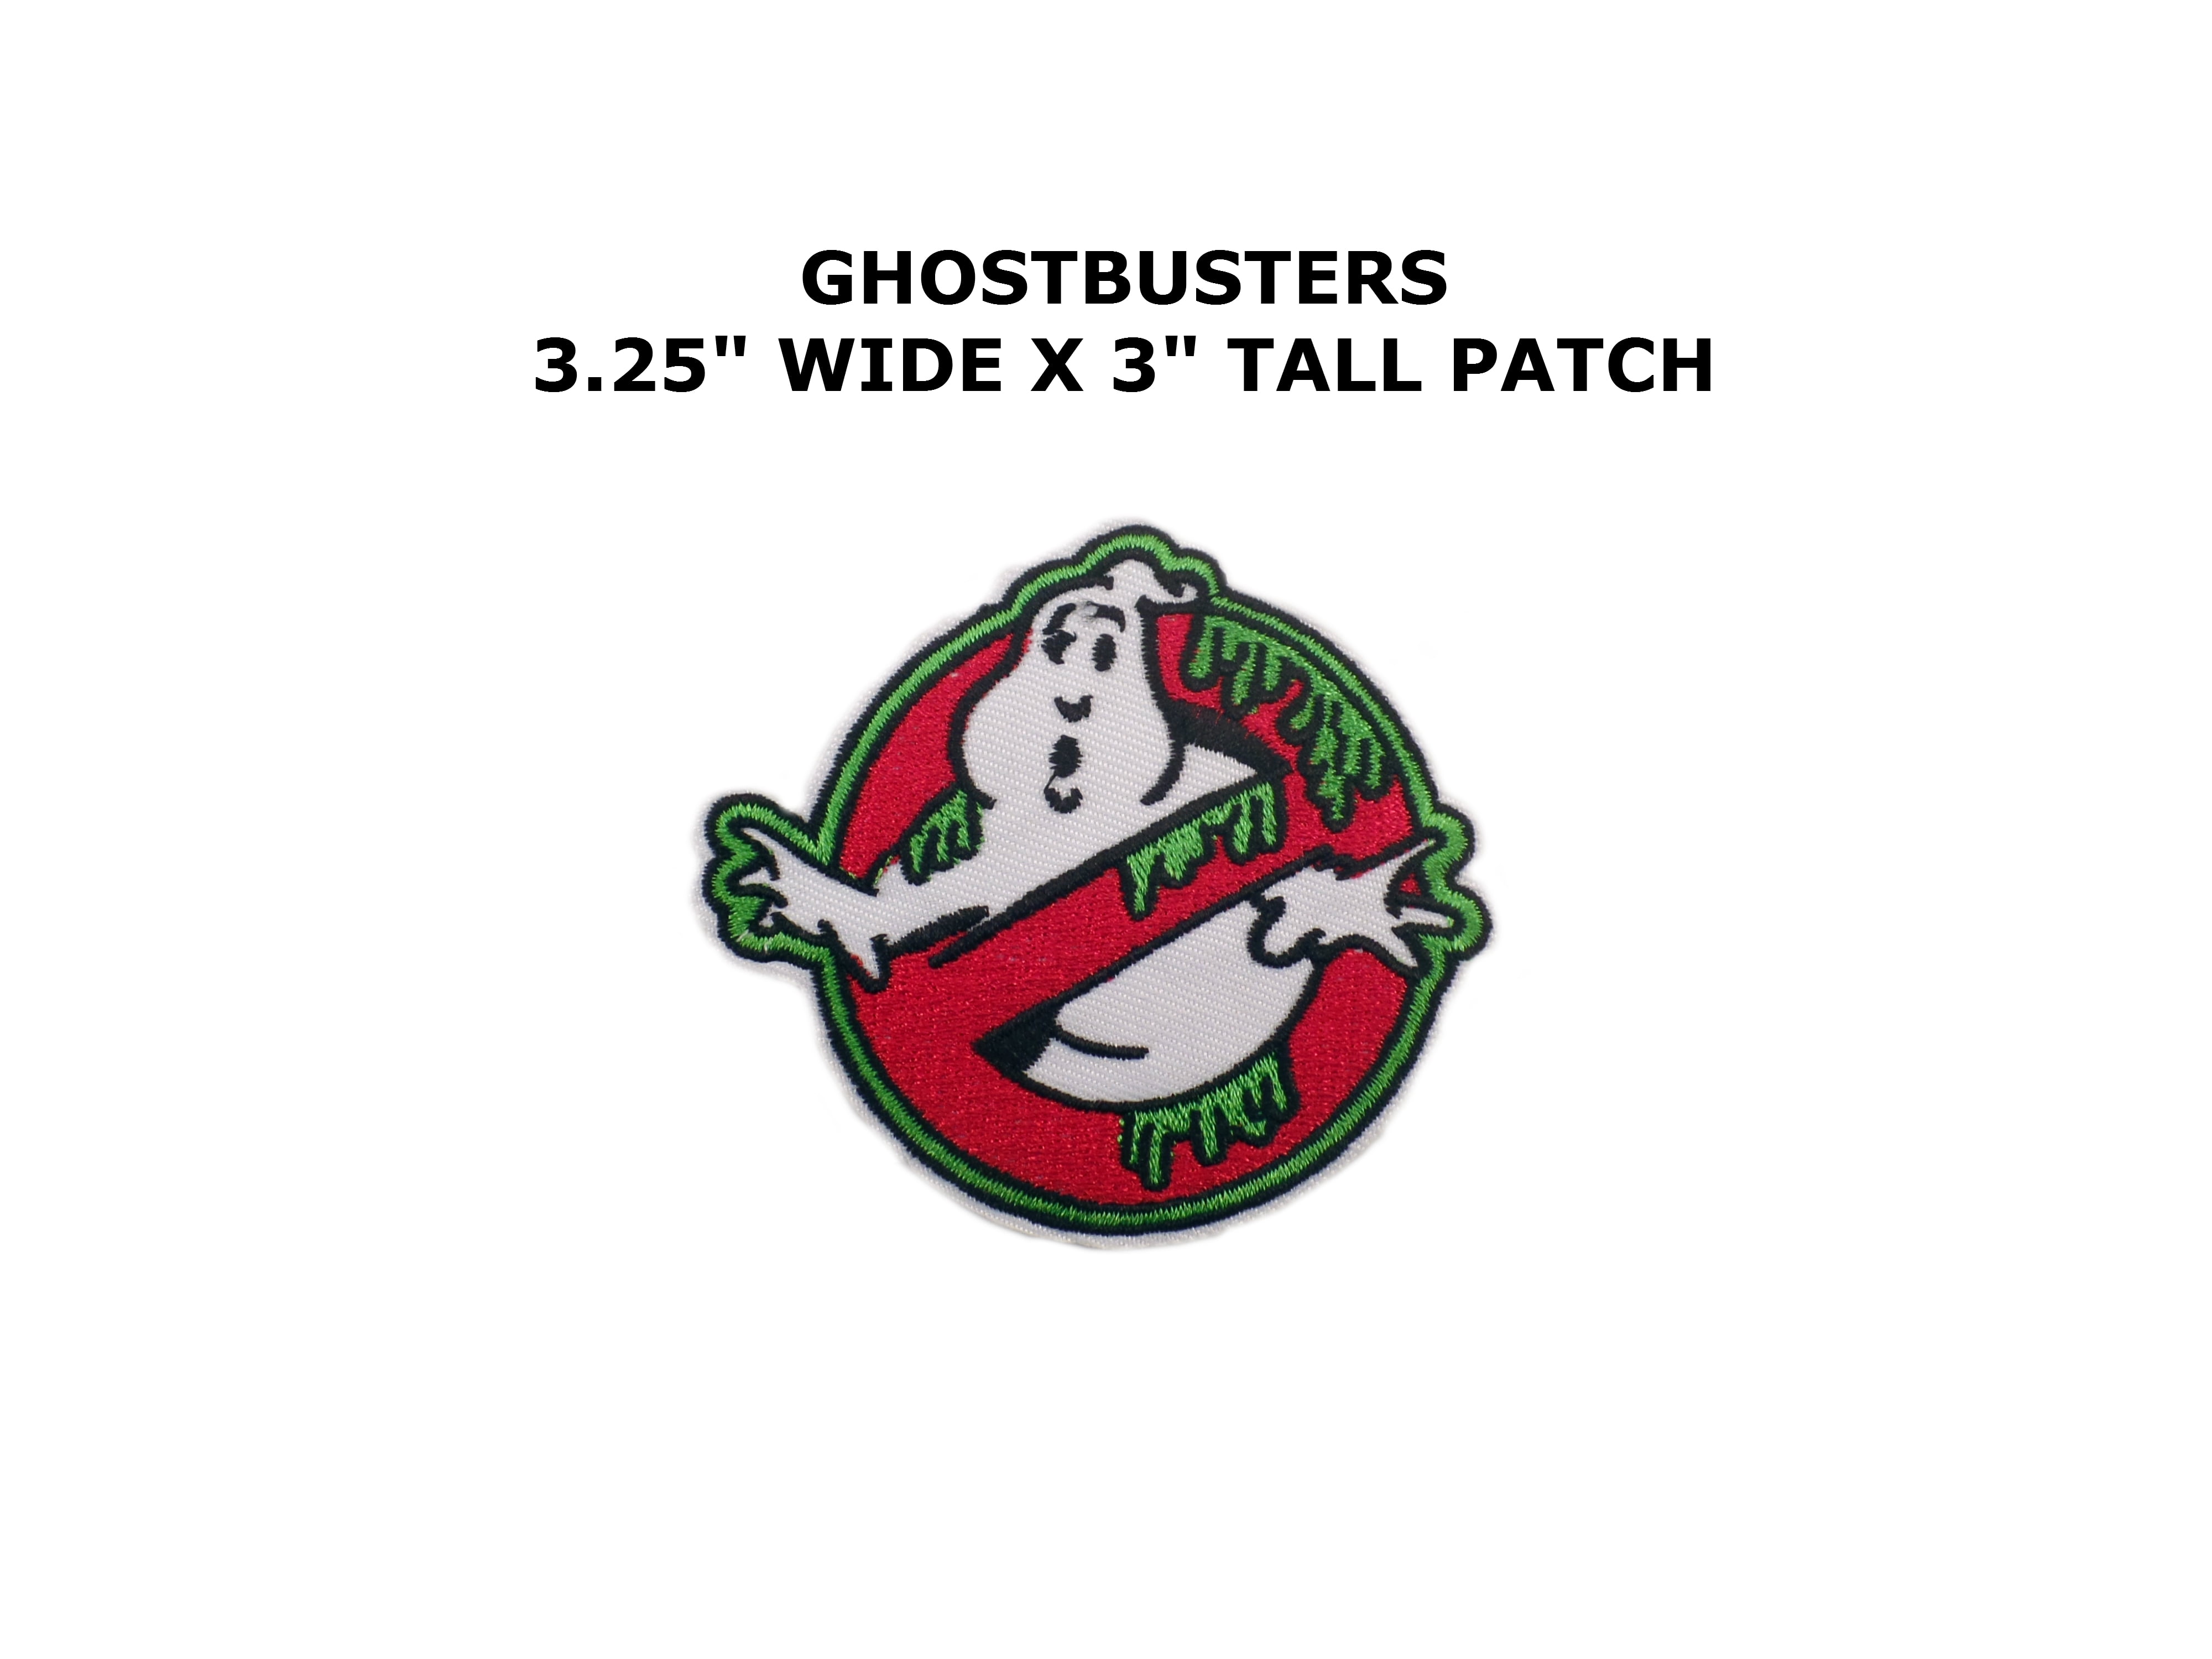 Adult Sized SLIMED Ghostbusters No Ghost Embroidered Patch  with Iron-On backing 